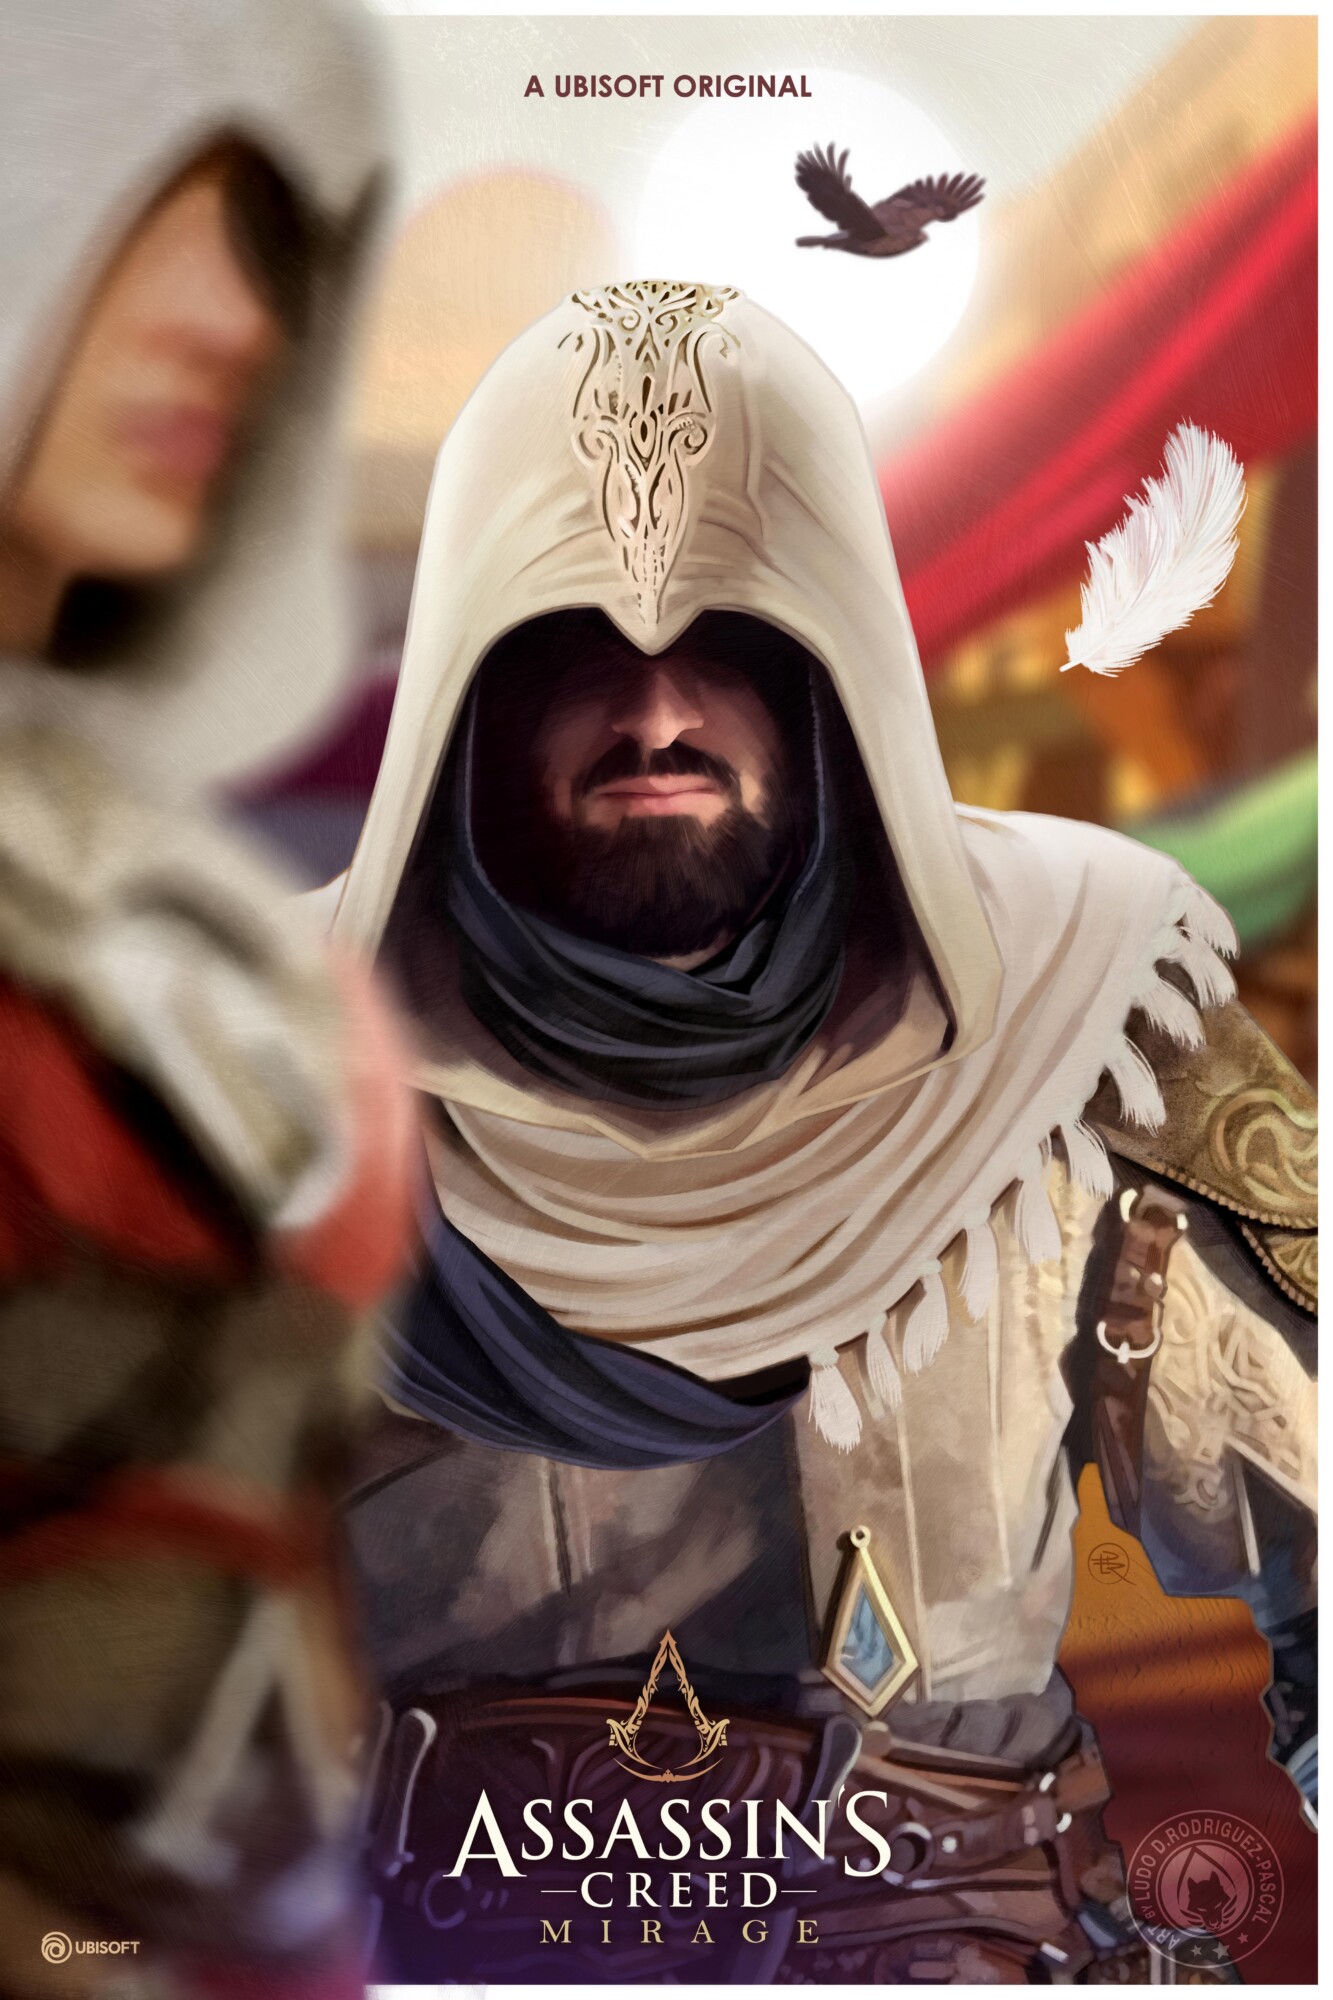 ASSASSIN’S CREED MIRAGE